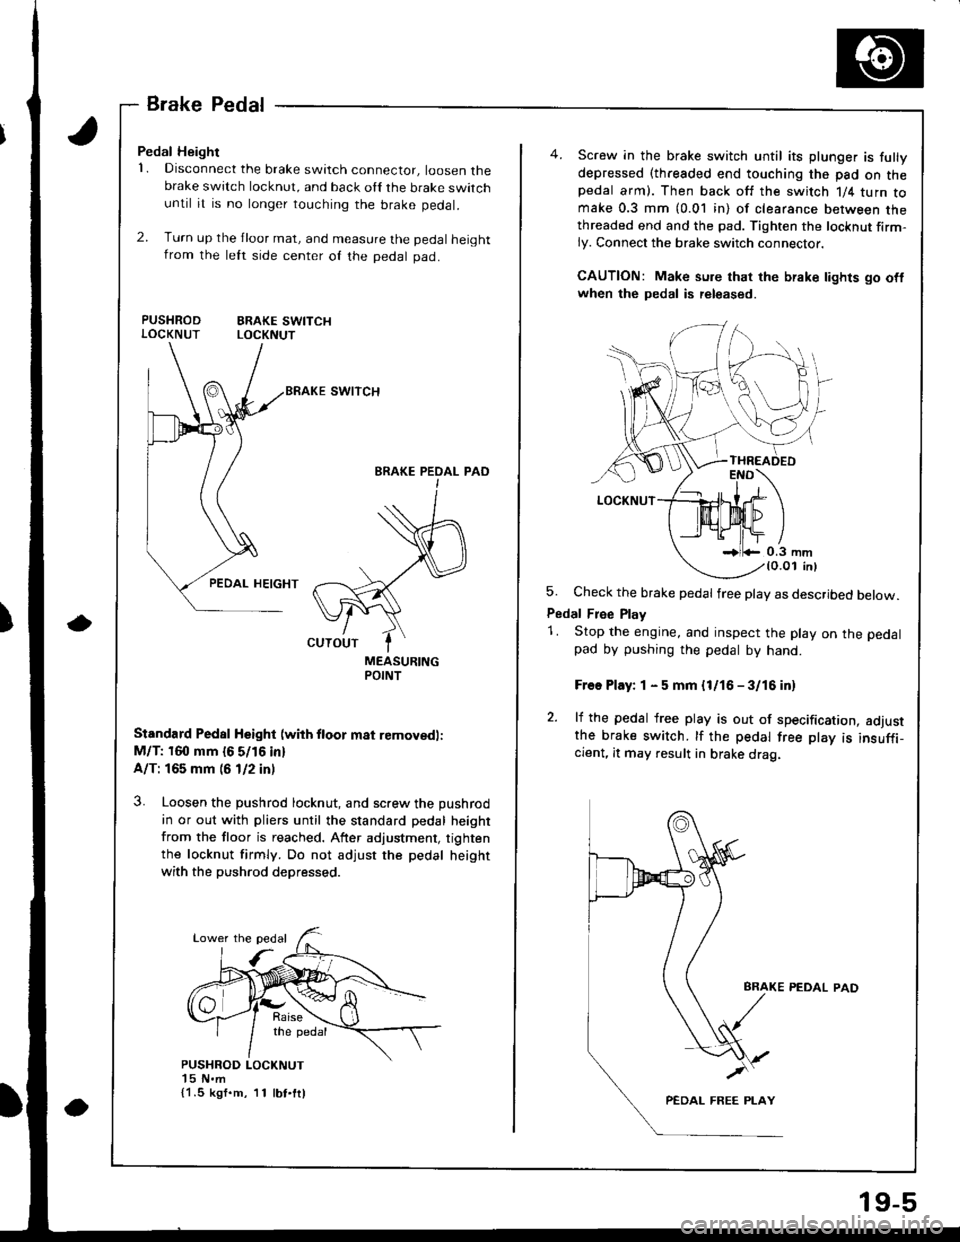 HONDA INTEGRA 1998 4.G Workshop Manual a
BrakePedal
Pedal Height
1. Disconnect the brake switch connector, loosen thebrake switch locknut, and back oll the brake switchuntil it is no longer touching the brake pedal.
2. Turn up the jloor ma